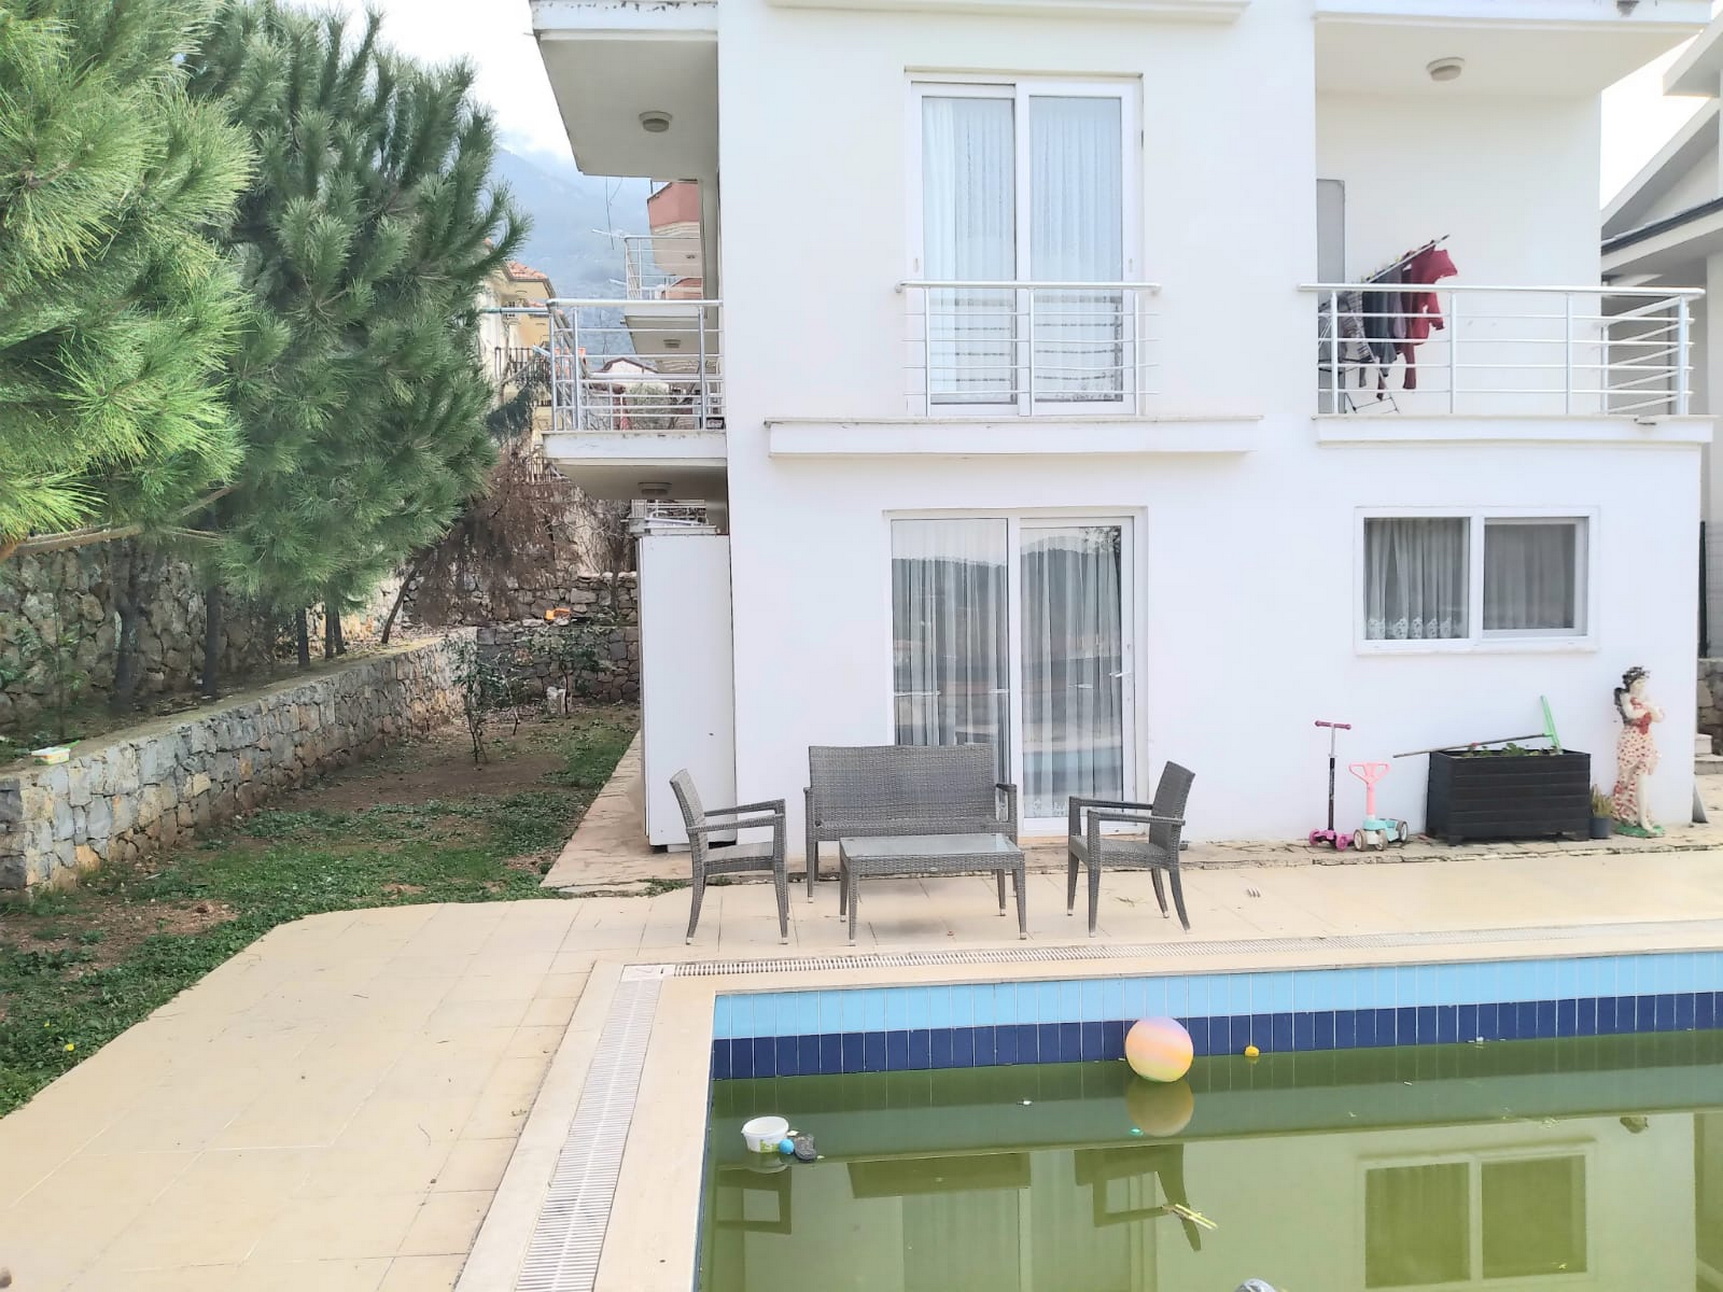 2 Bedroom Duplex Apartment with Shared pool in Ovacik